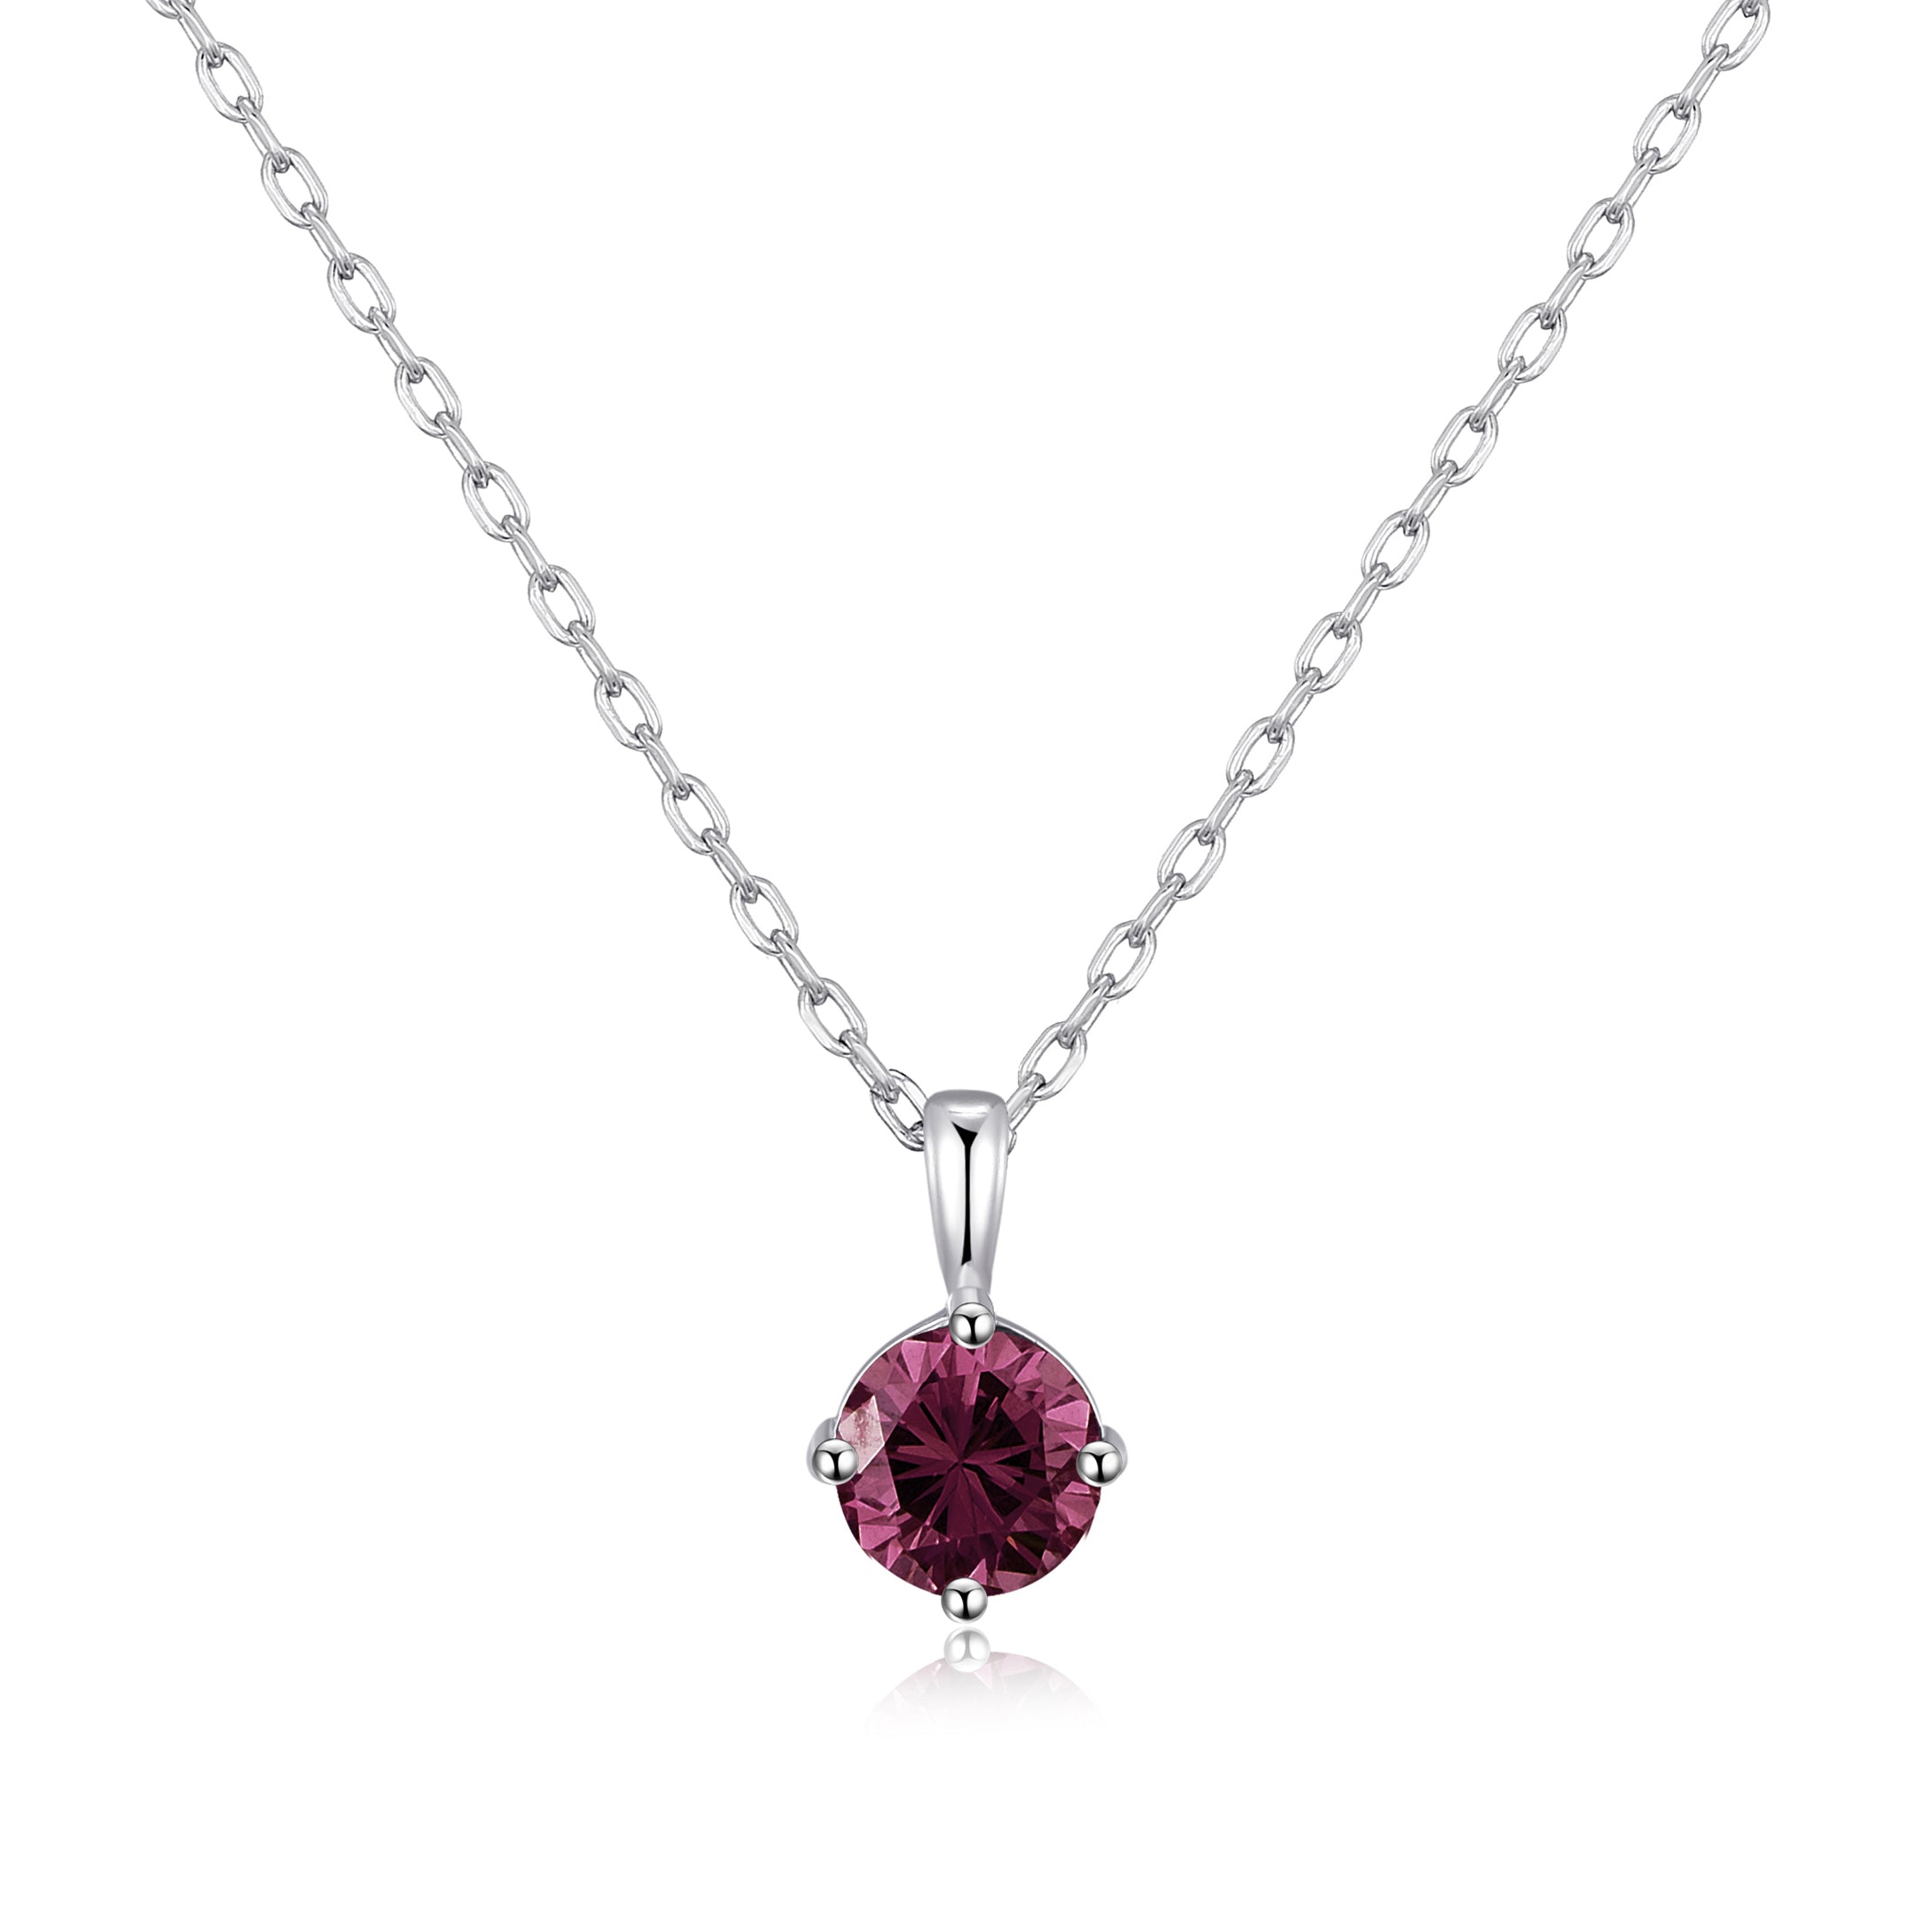 Sterling Silver June (Alexandrite) Birthstone Necklace Created with Zircondia® Crystals by Philip Jones Jewellery